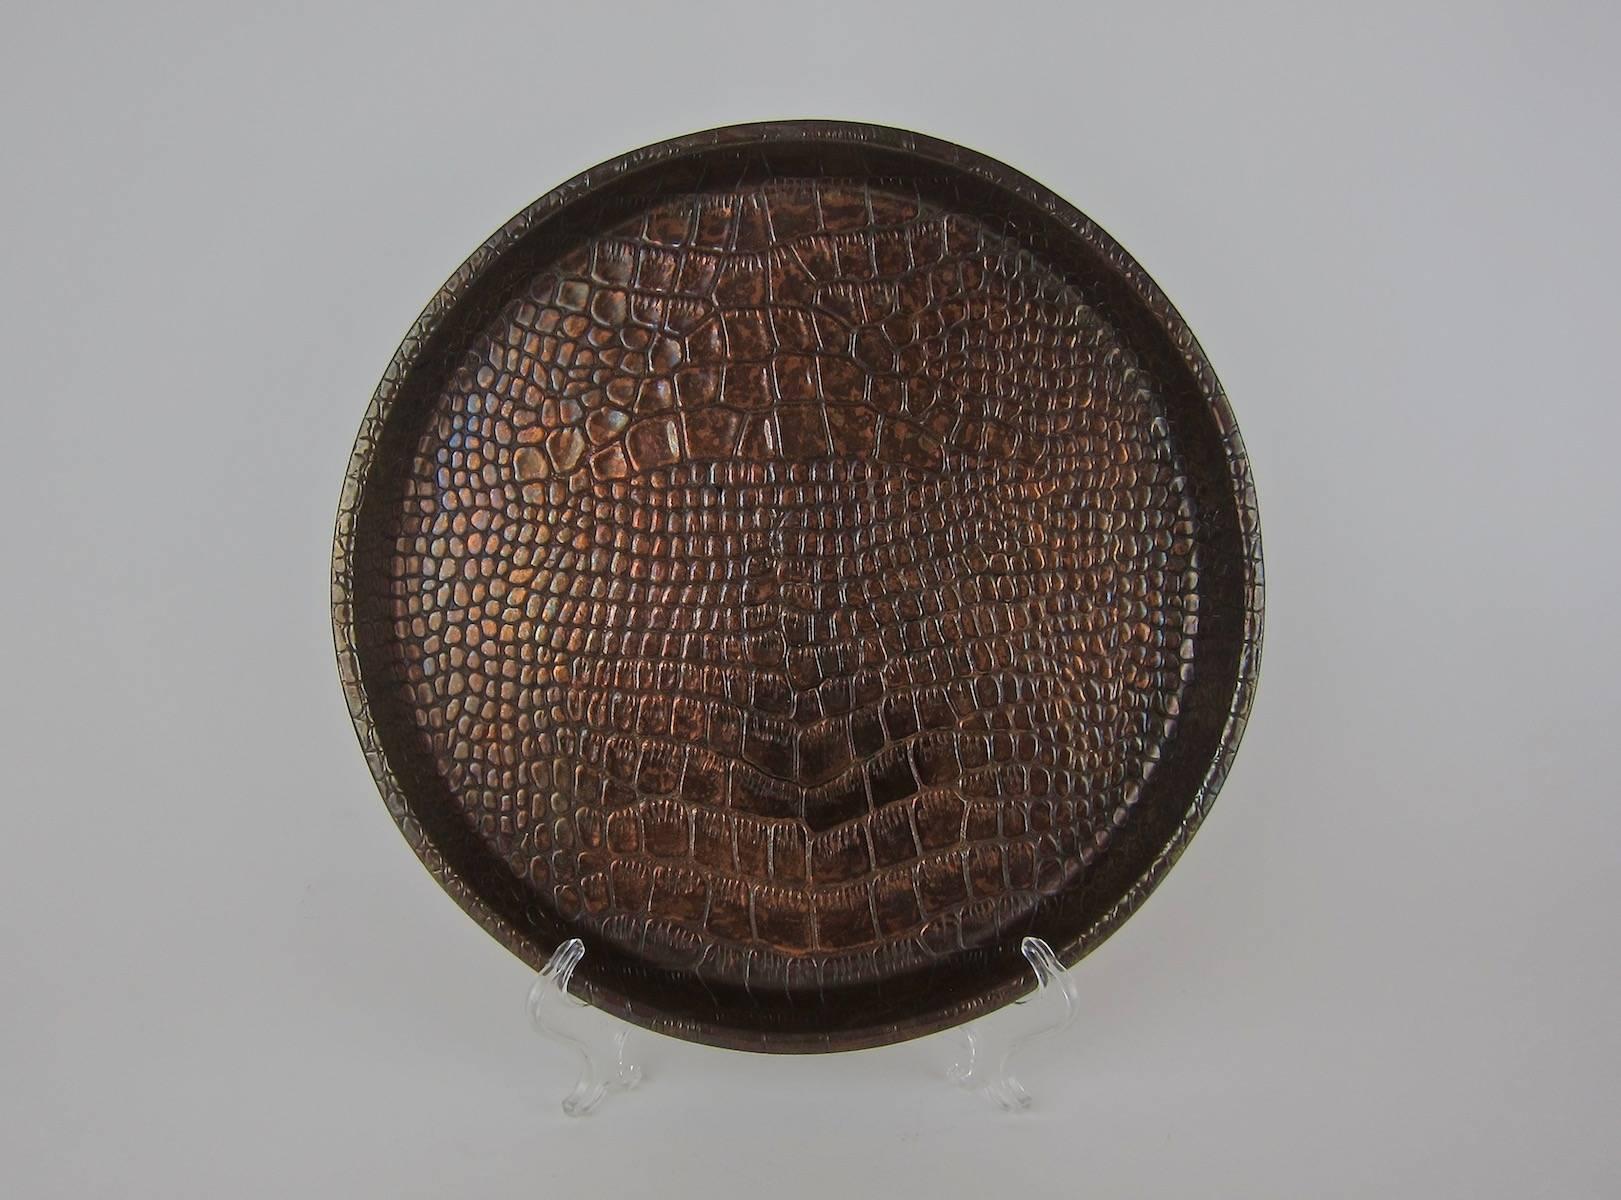 A handsome English Art Deco serving tray from Joseph Sankey and Sons, Ltd., (JS&S) of Bilston, Staffordshire. The vintage art metal tray is decorated with an embossed lizard skin pattern, measuring 12 in. Diameter -- the perfect size for cocktails,